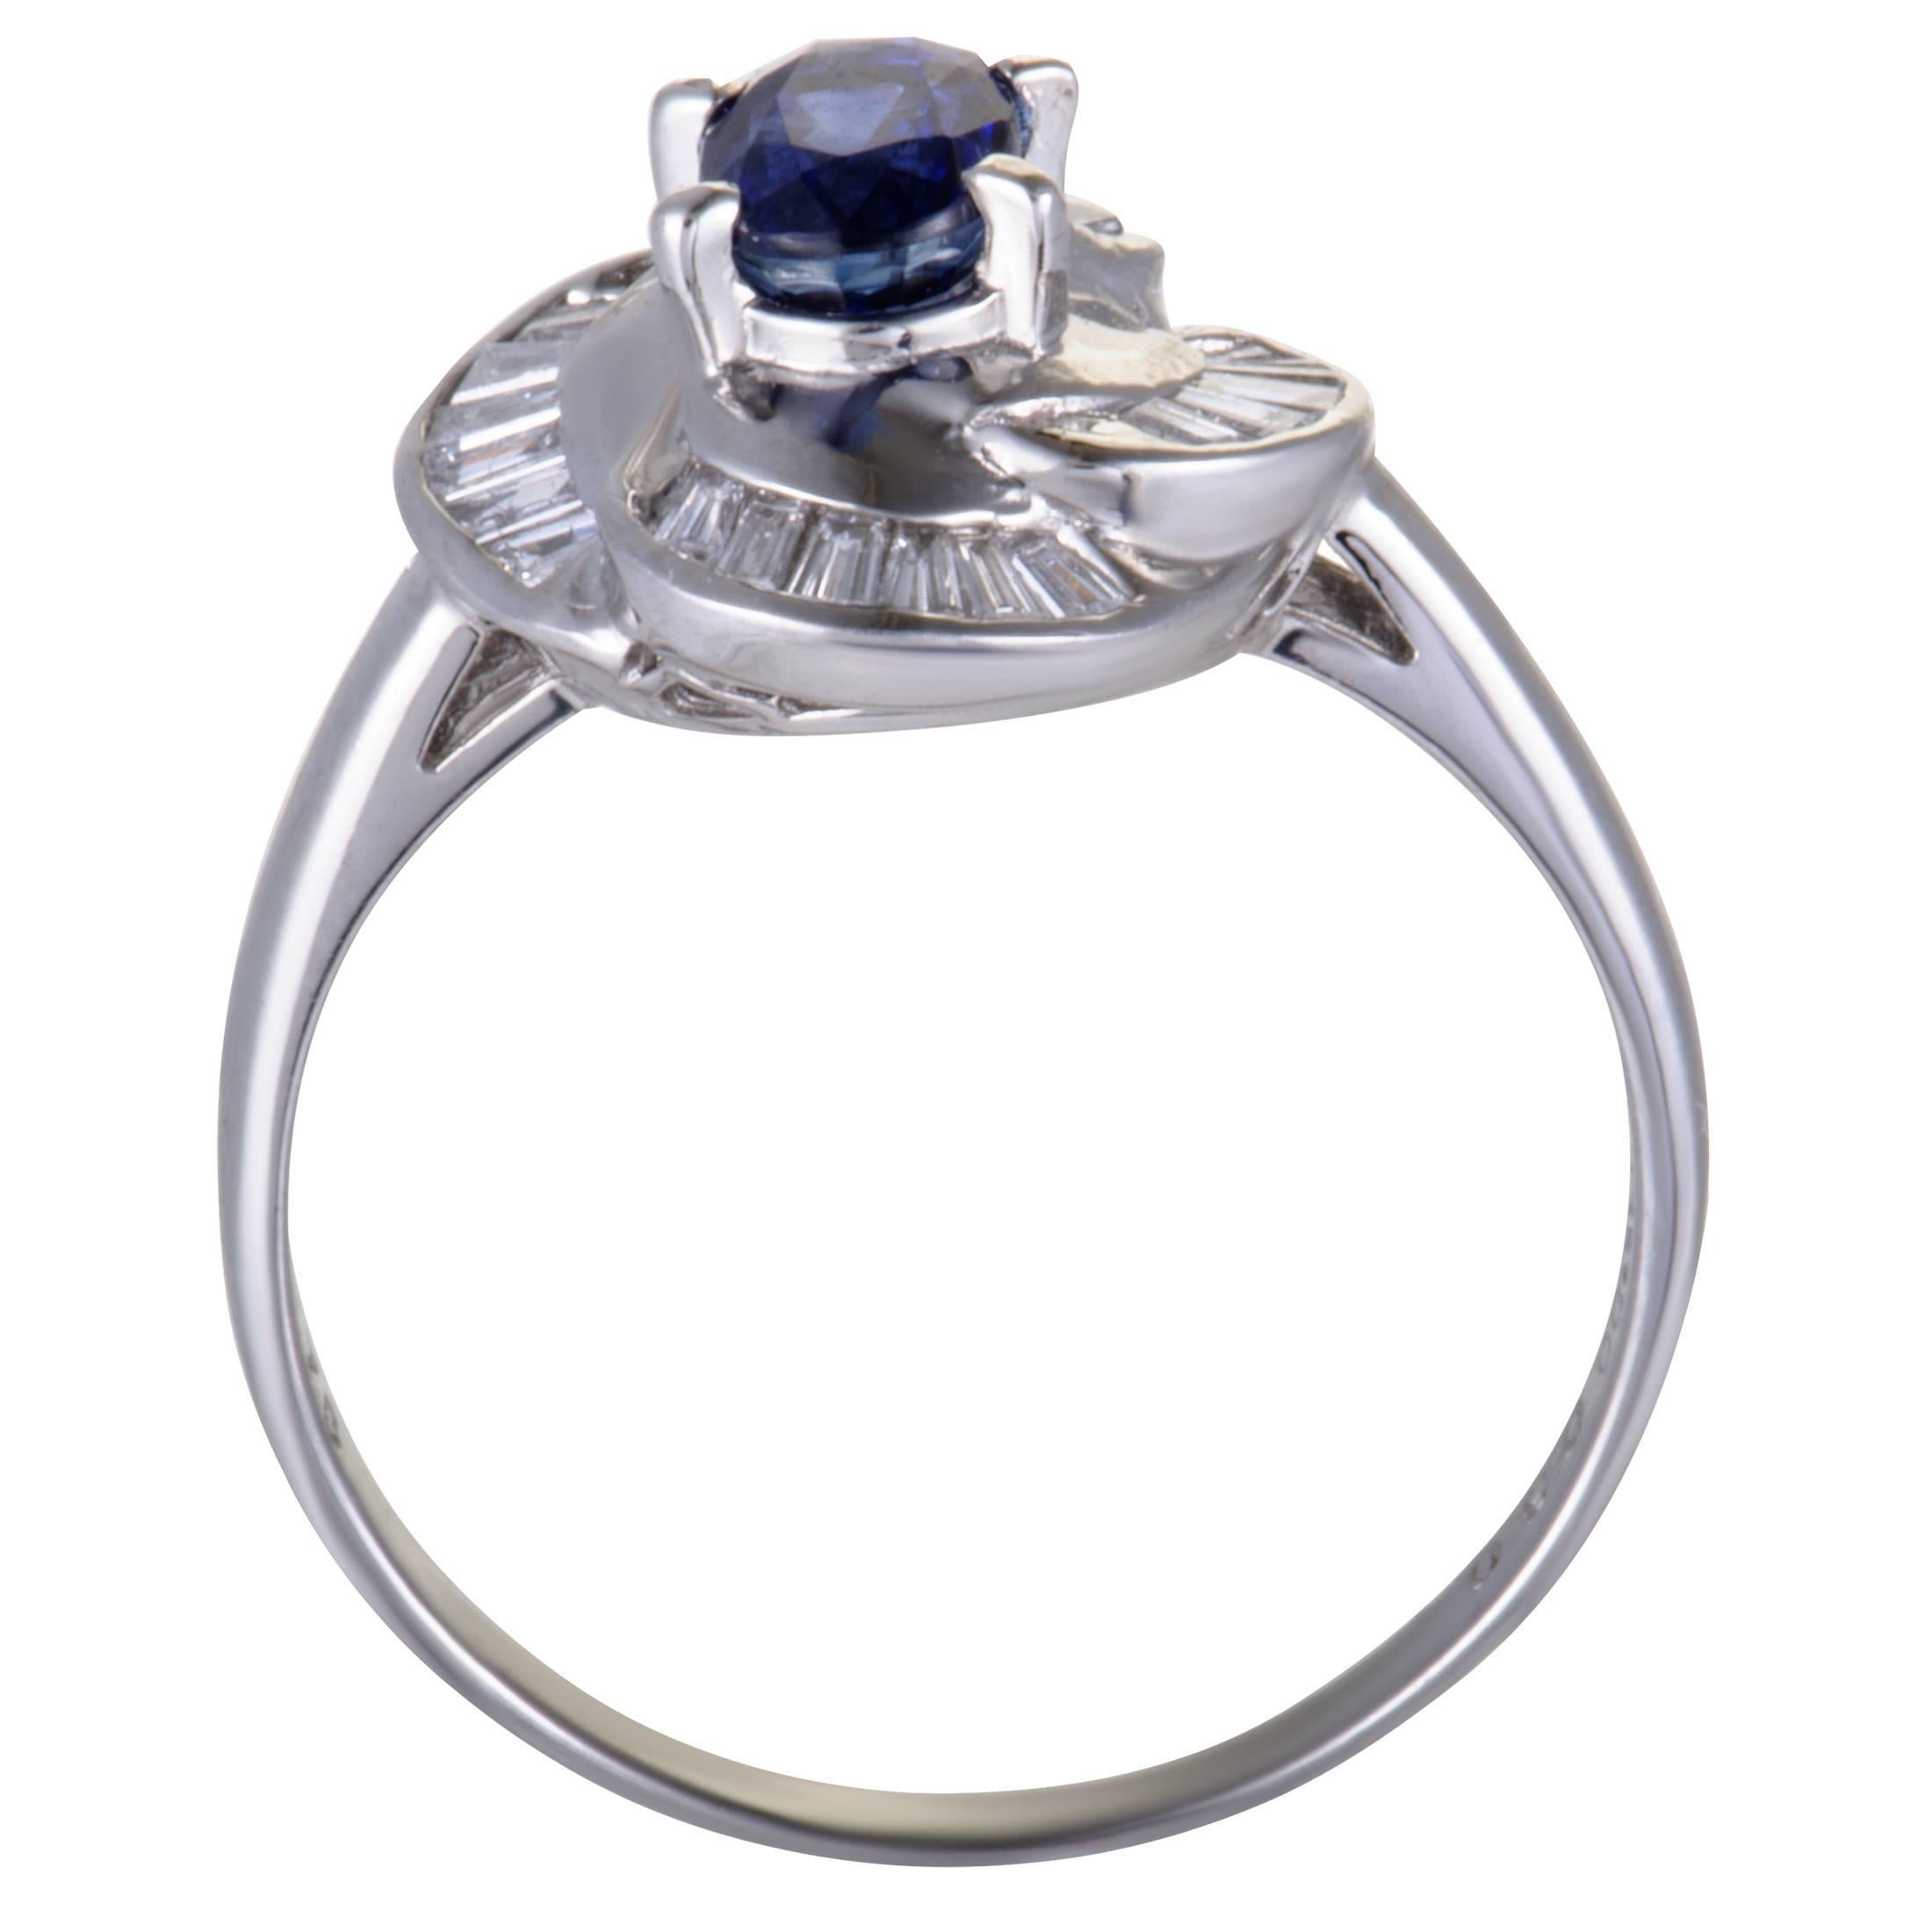 Designed in an endearingly graceful manner, this sublime ring offers an exceptionally classy and elegant appearance. Made of platinum, the ring is set with 0.30 carats of diamonds, while the central place is taken by a captivating sapphire that